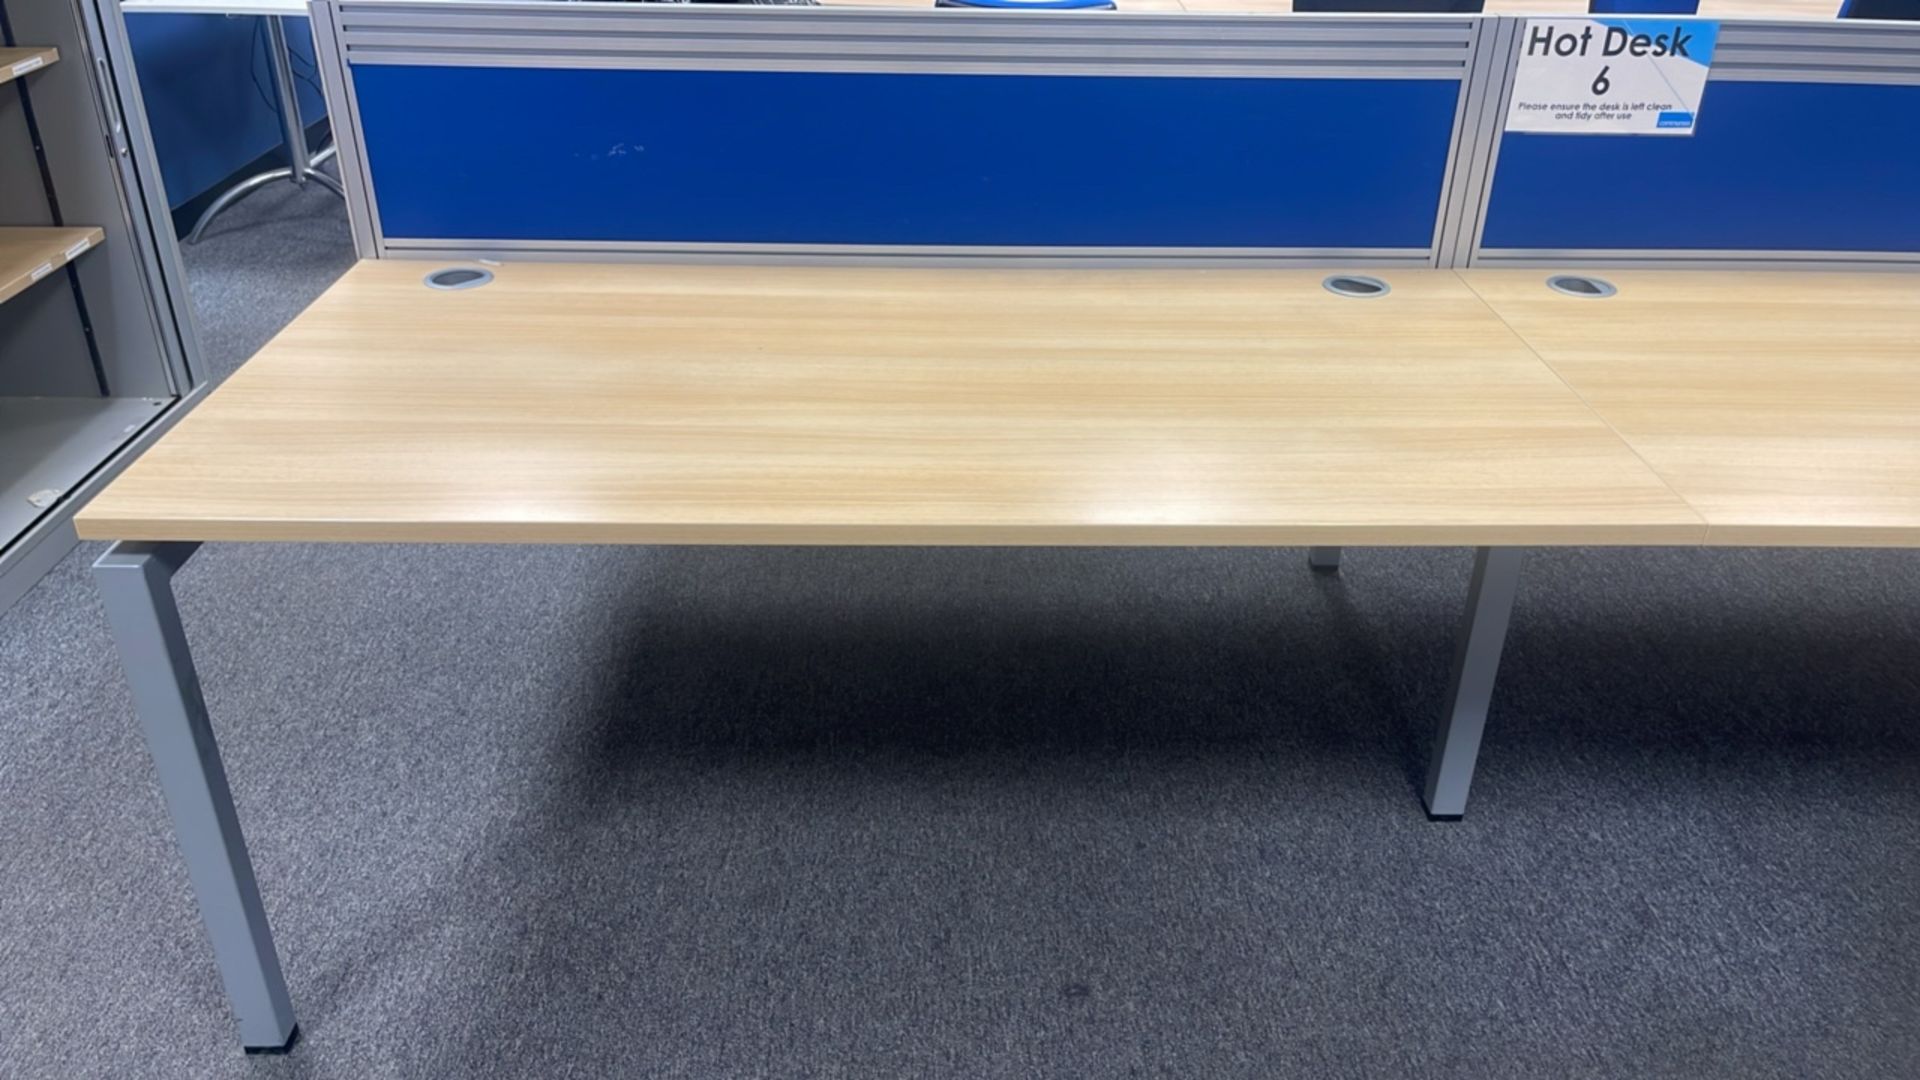 Double Bank Of Hot Desks - Image 3 of 5